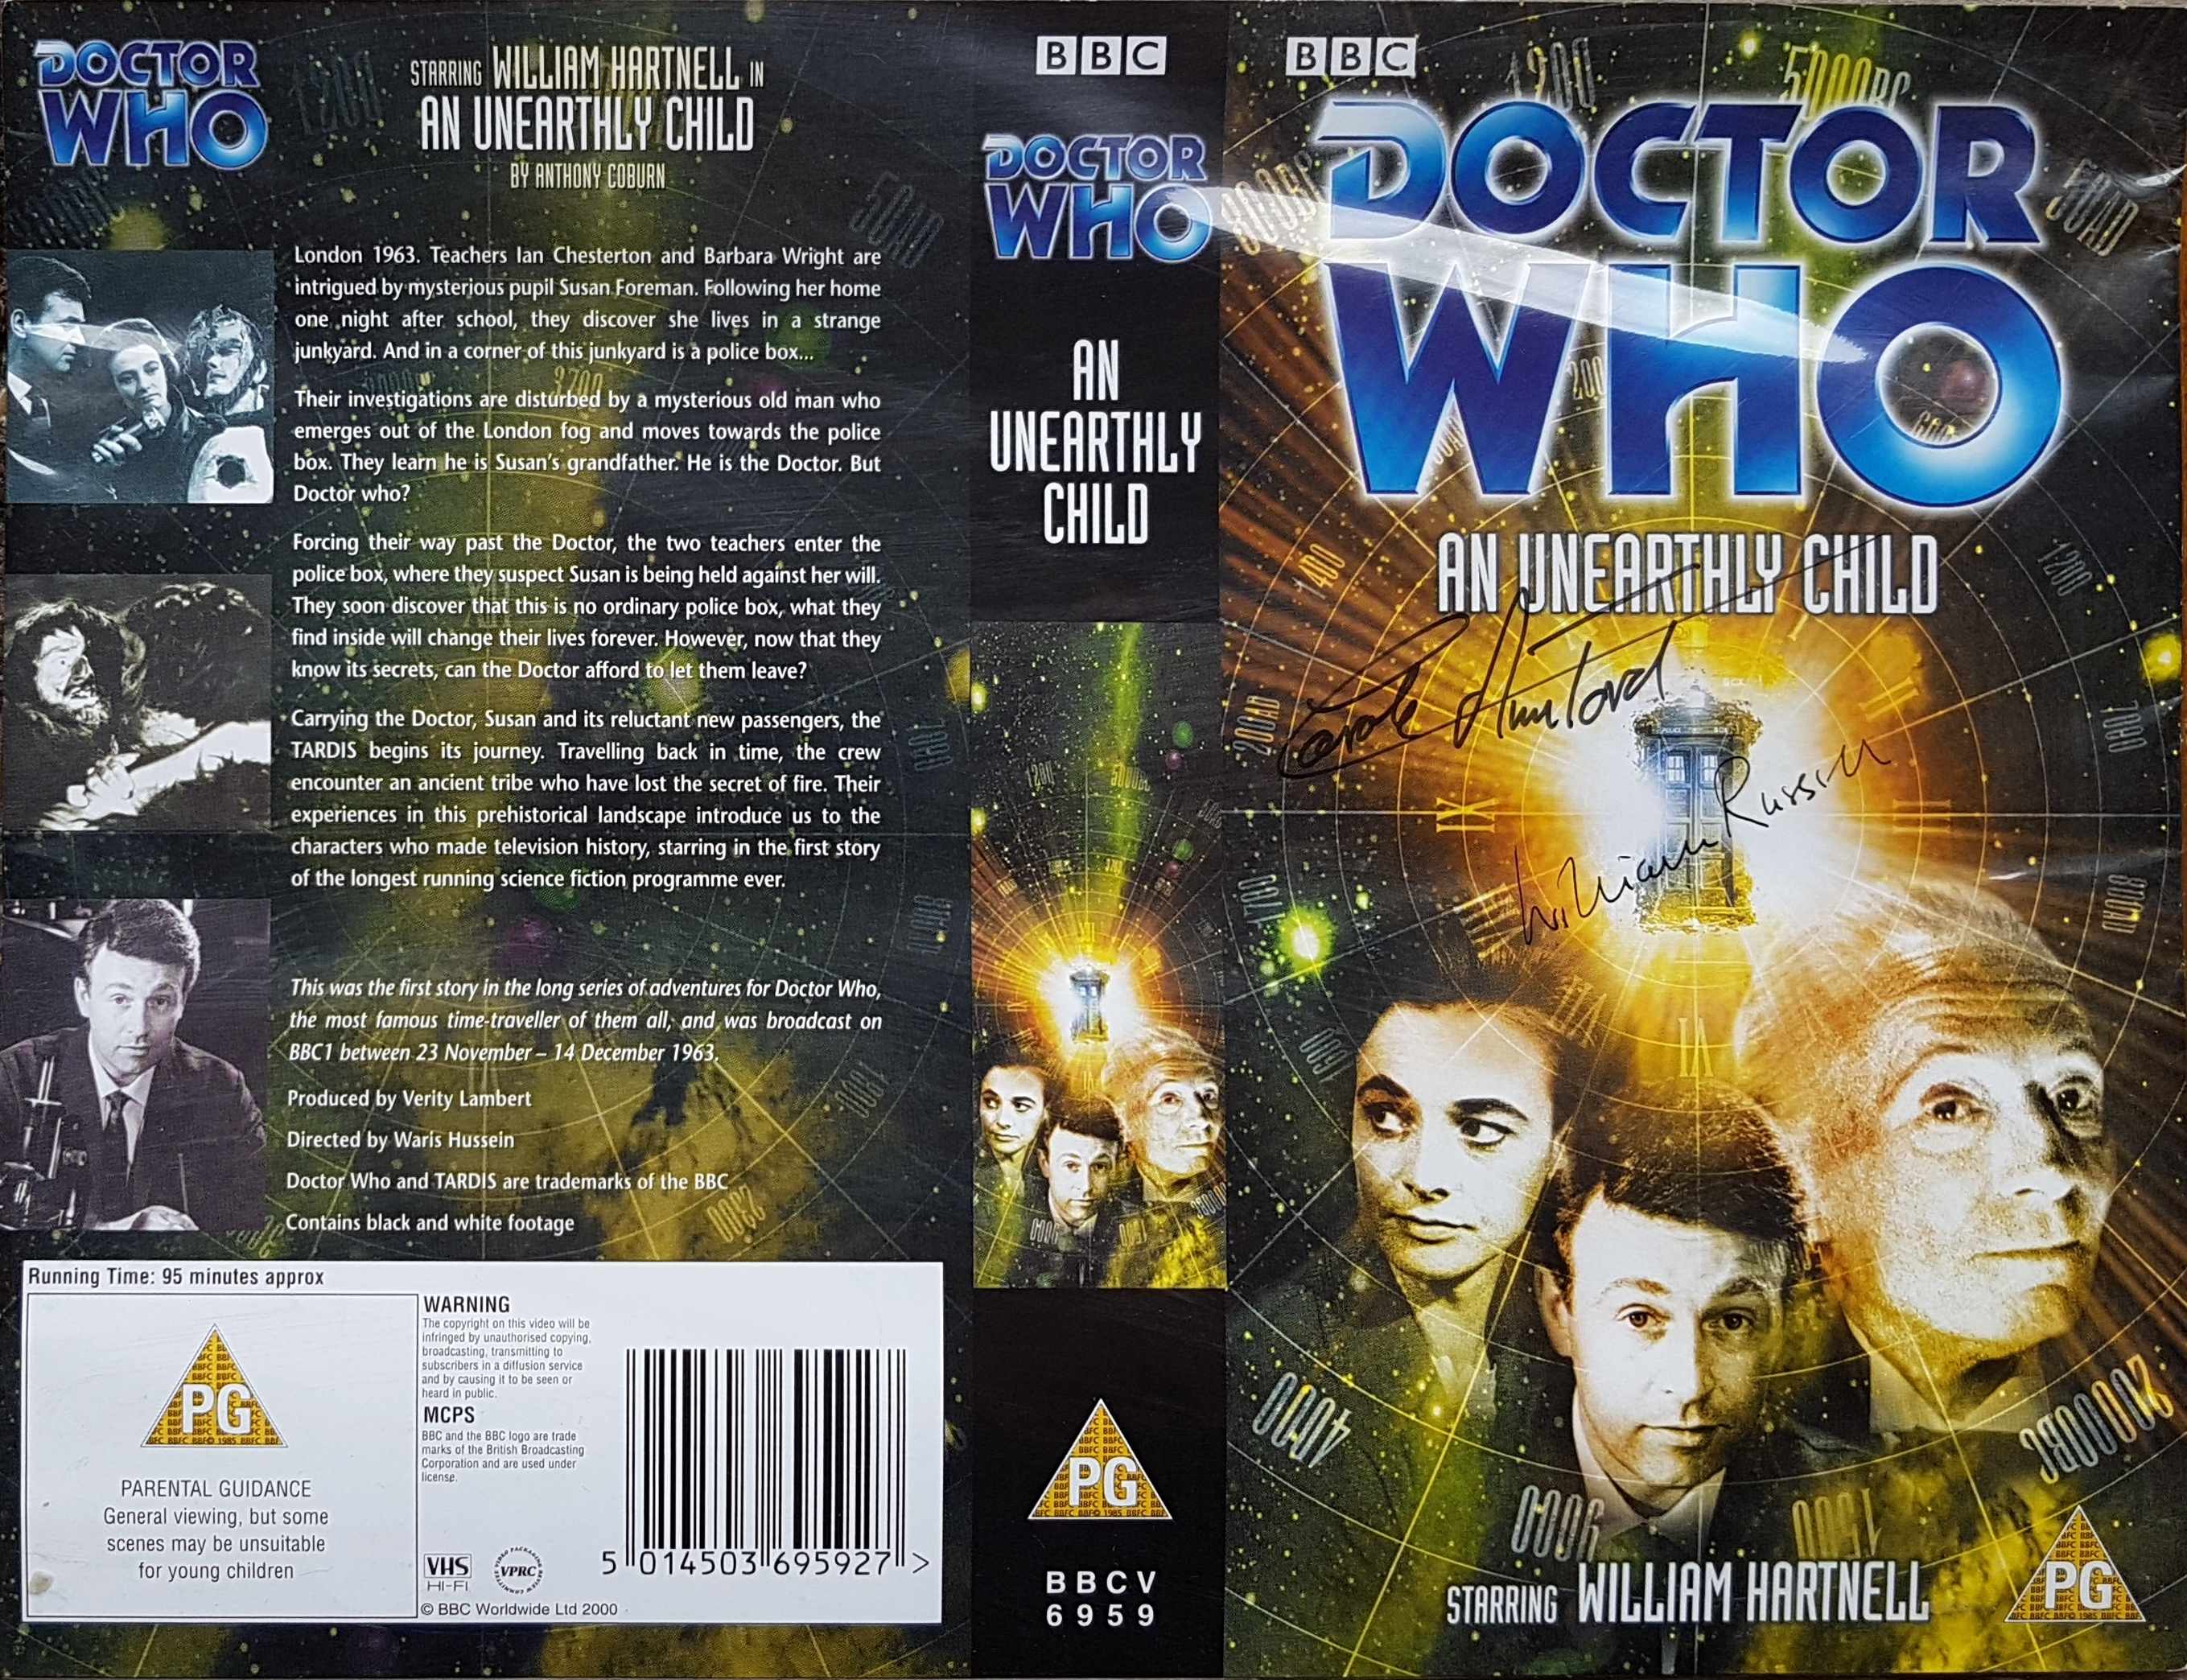 Picture of BBCV 6959 Doctor Who - An unearthly child (Autographed) by artist Anthony Coburn from the BBC videos - Records and Tapes library